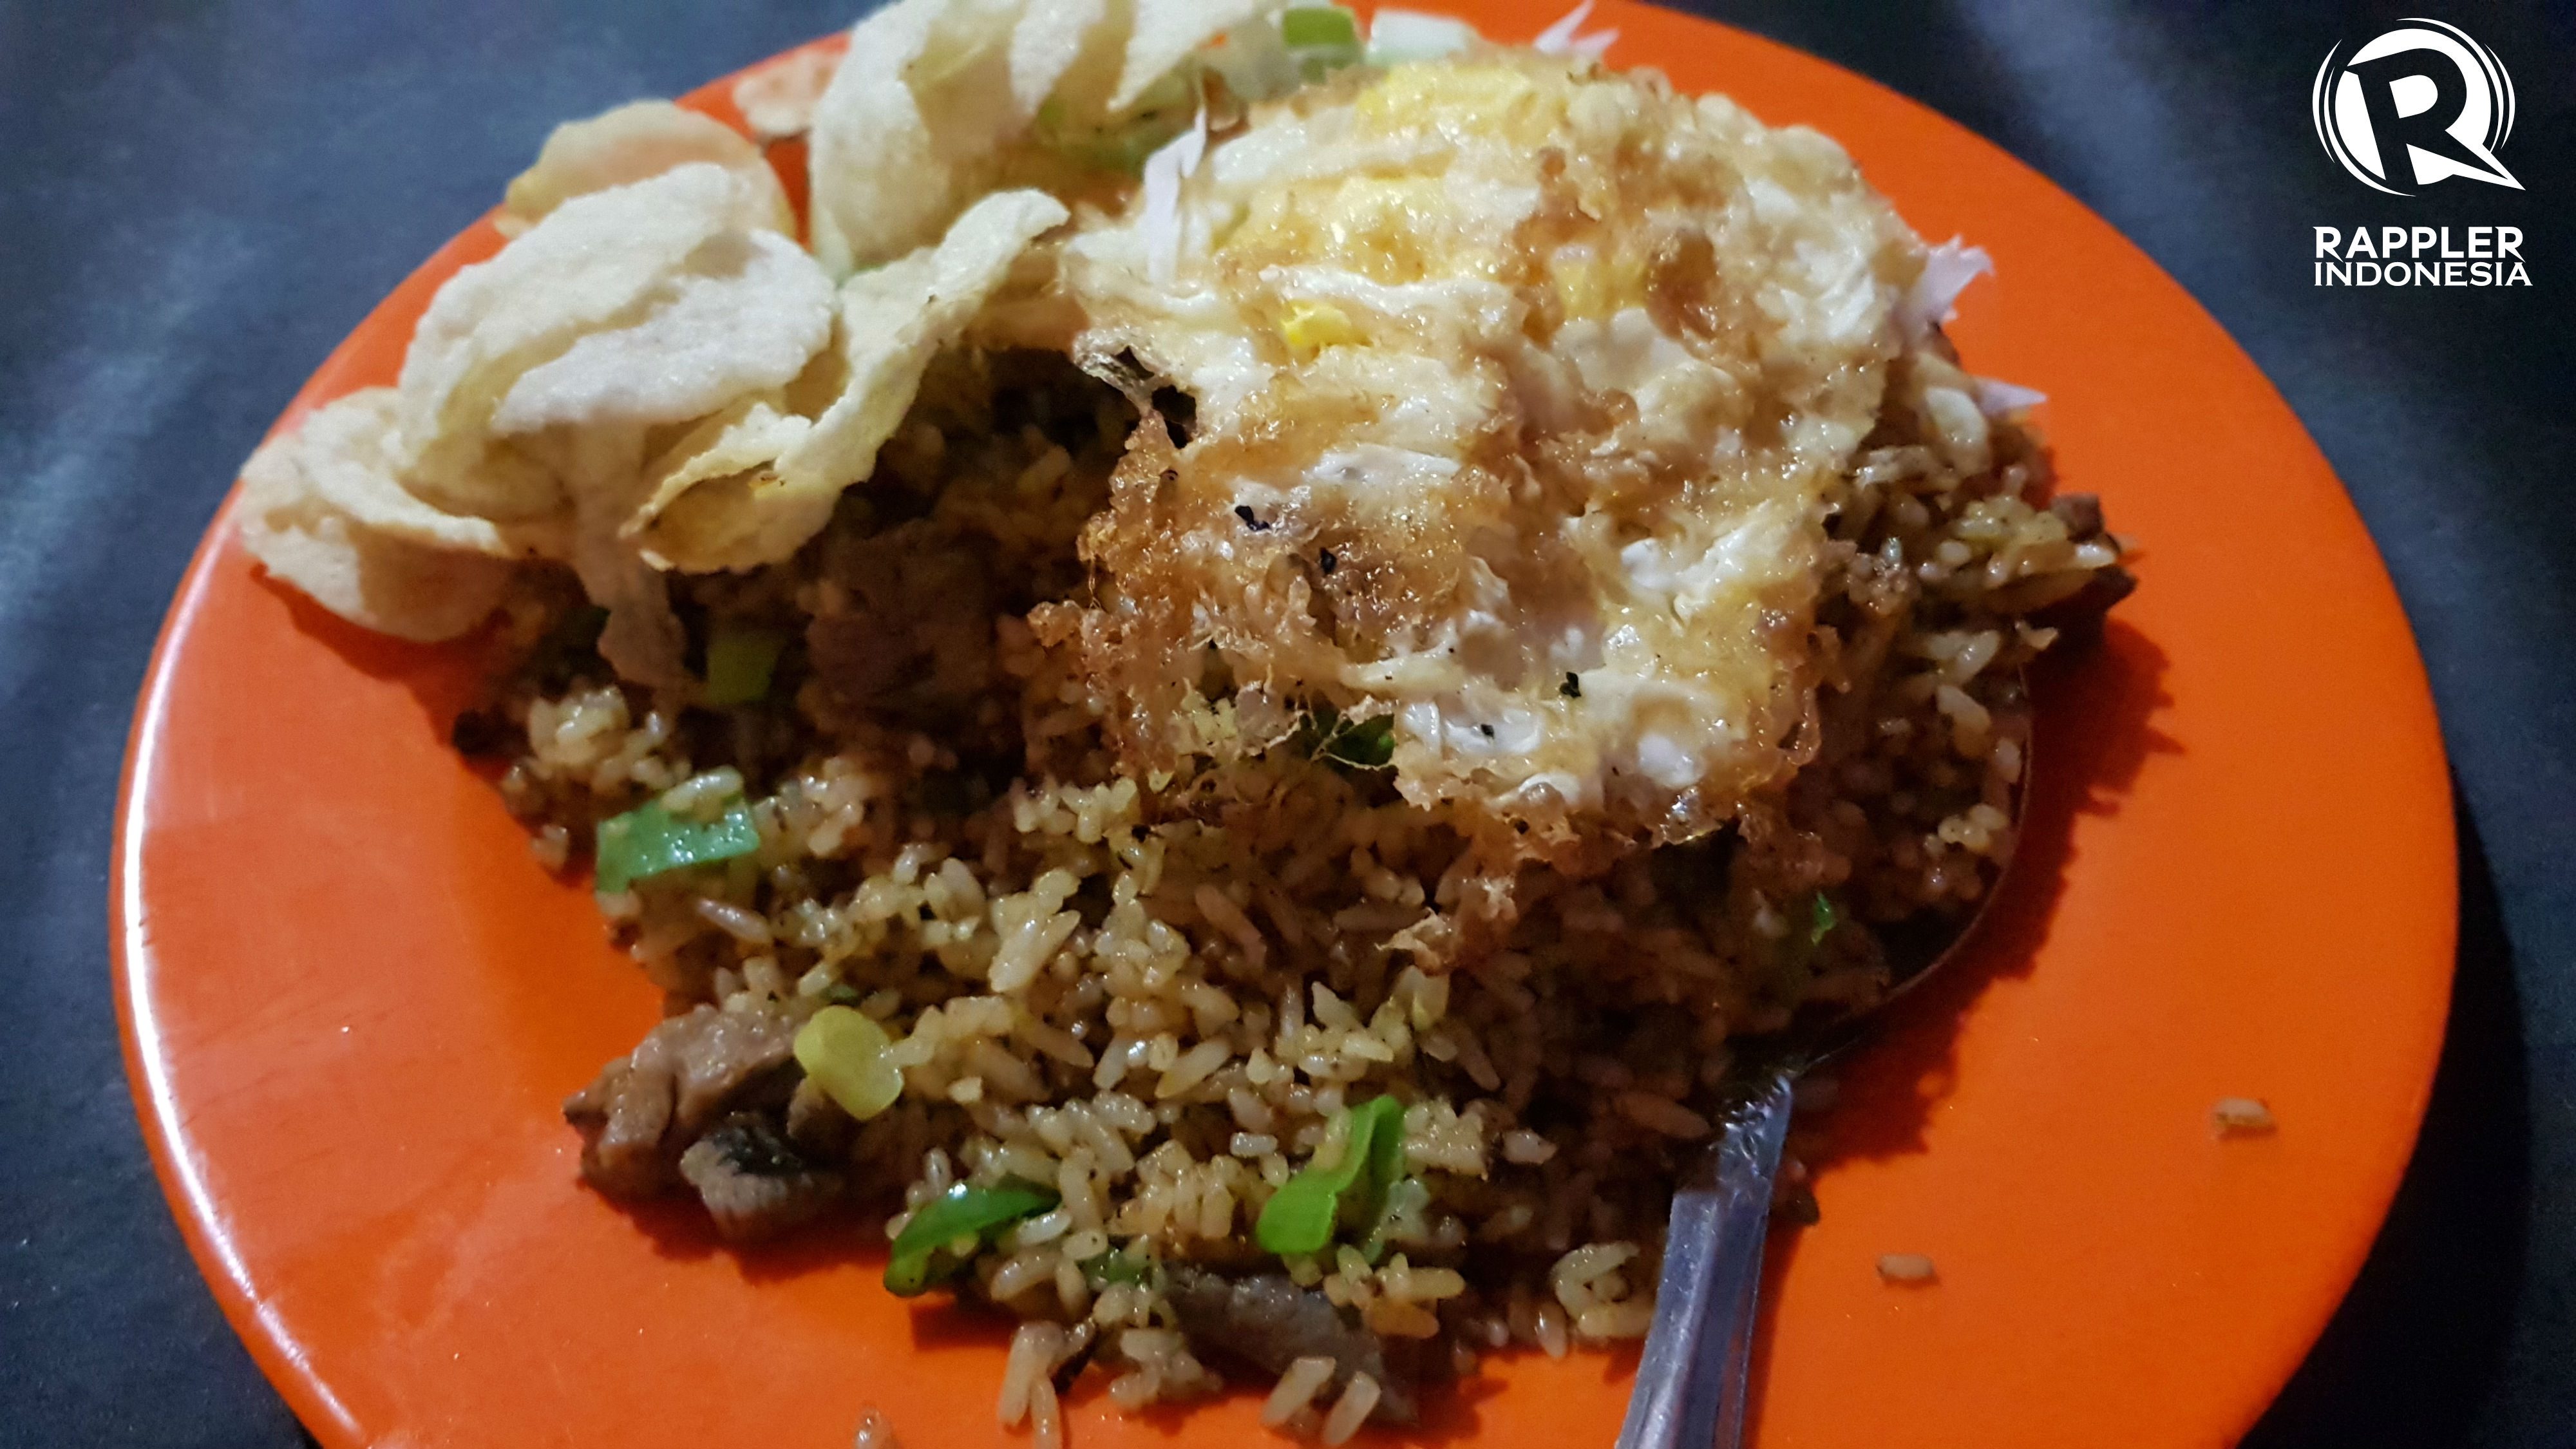 MANY OPTIONS. Warung Bhakti offers various toppings on their fried rice dishes. Photo by Sakinah Ummu Haniy/Rappler 